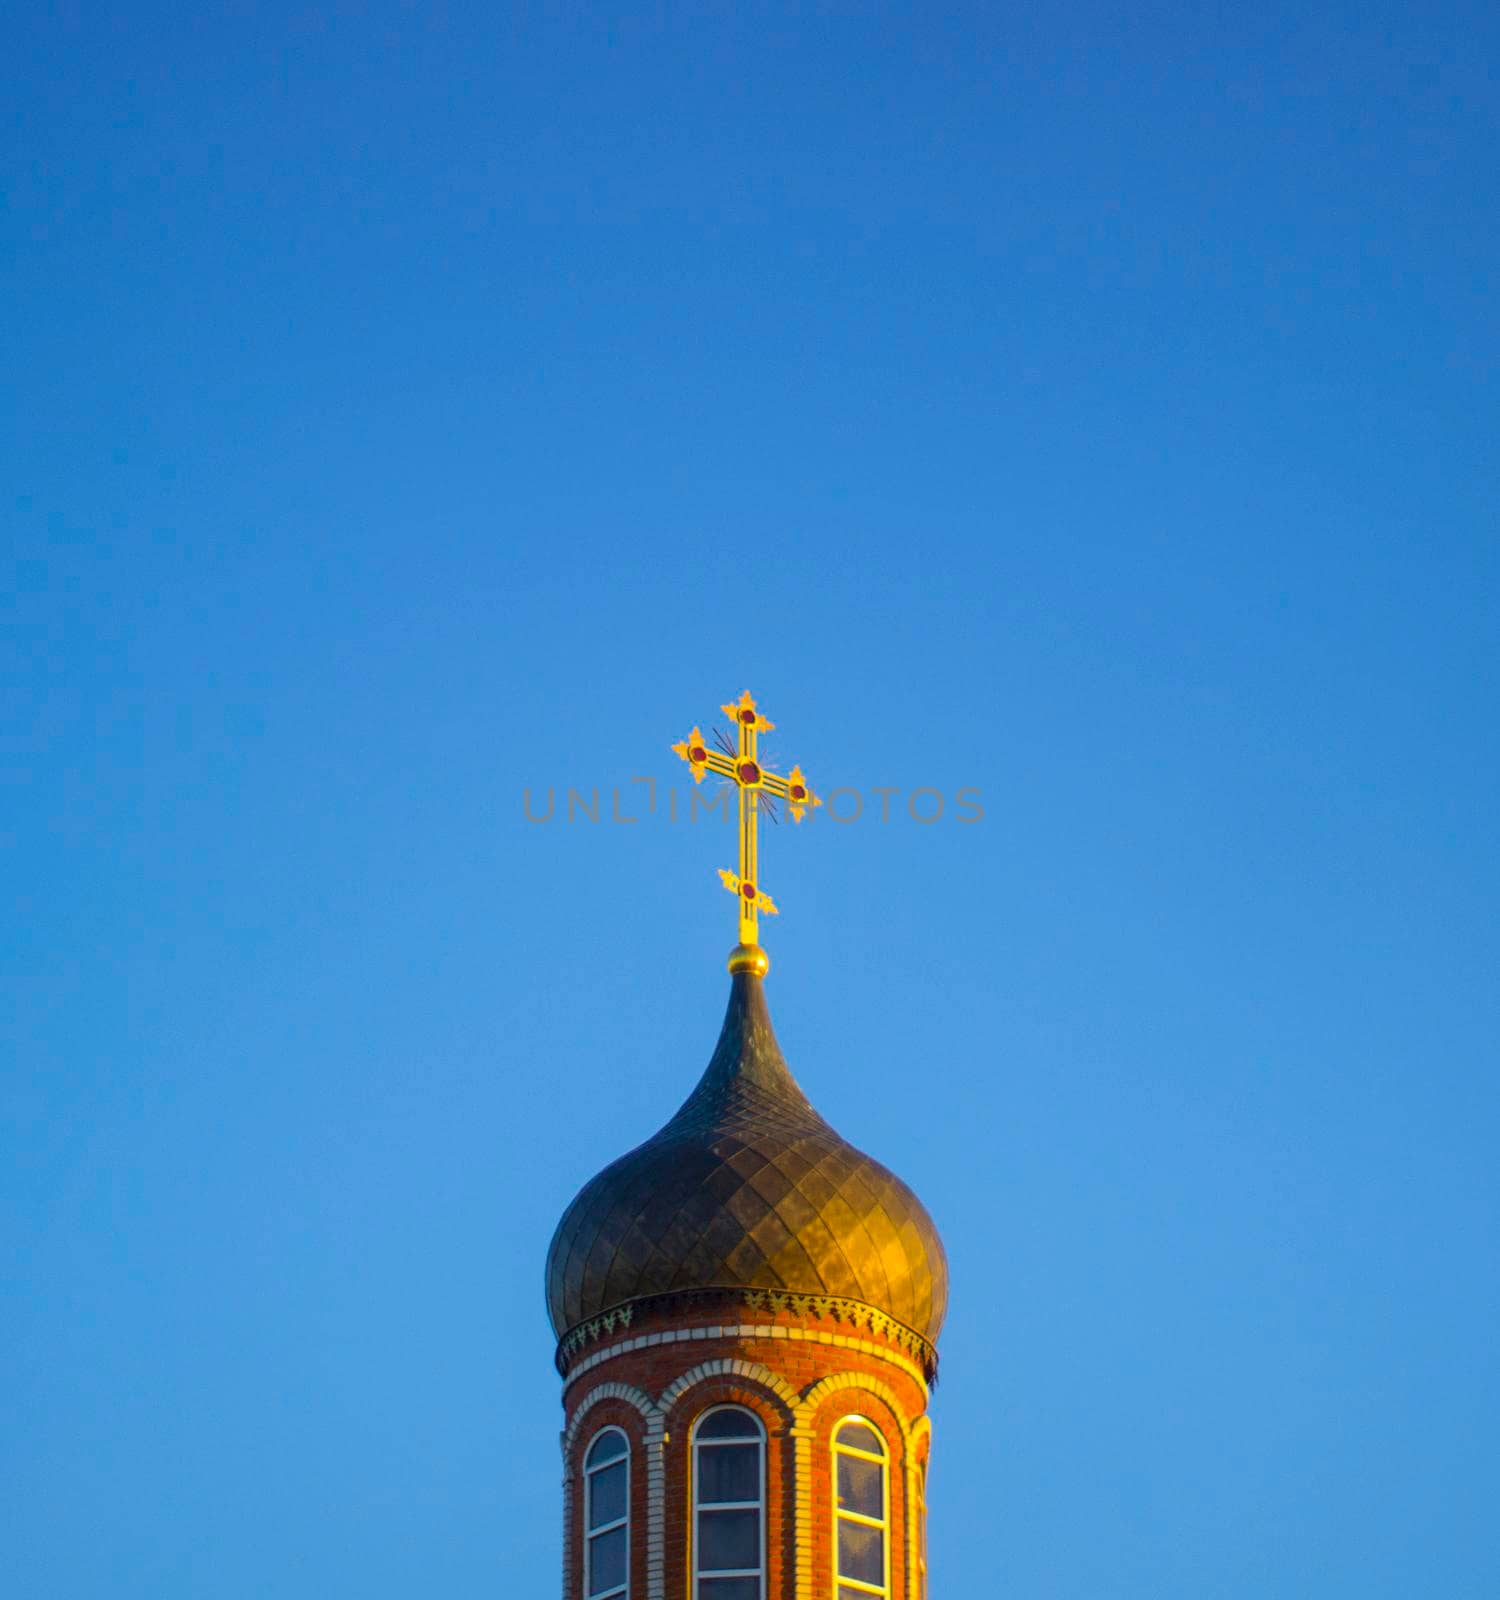 Dome of Orthodox church on blue sky background by macroarting